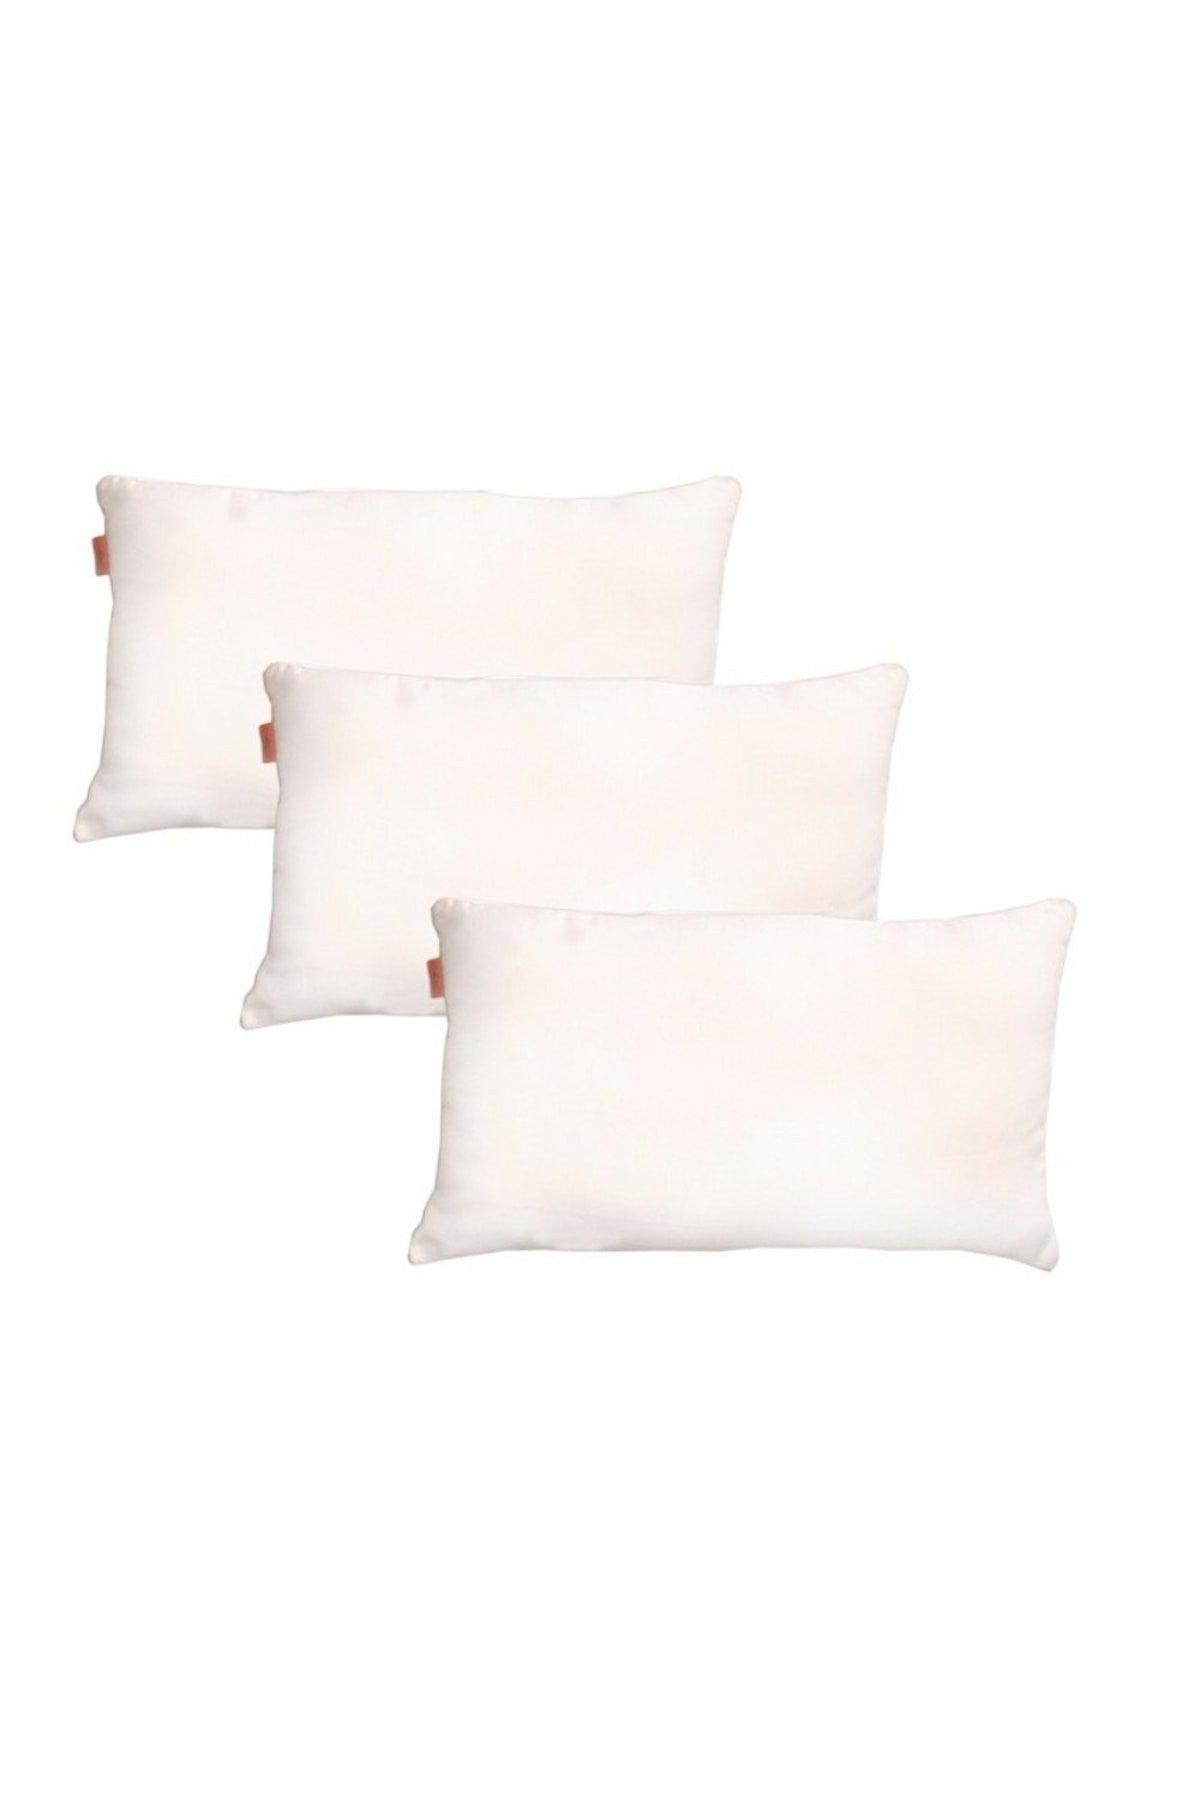 Silicone Filled Pillow - Puffy Soft Pillow - 3 Pillows - Swordslife